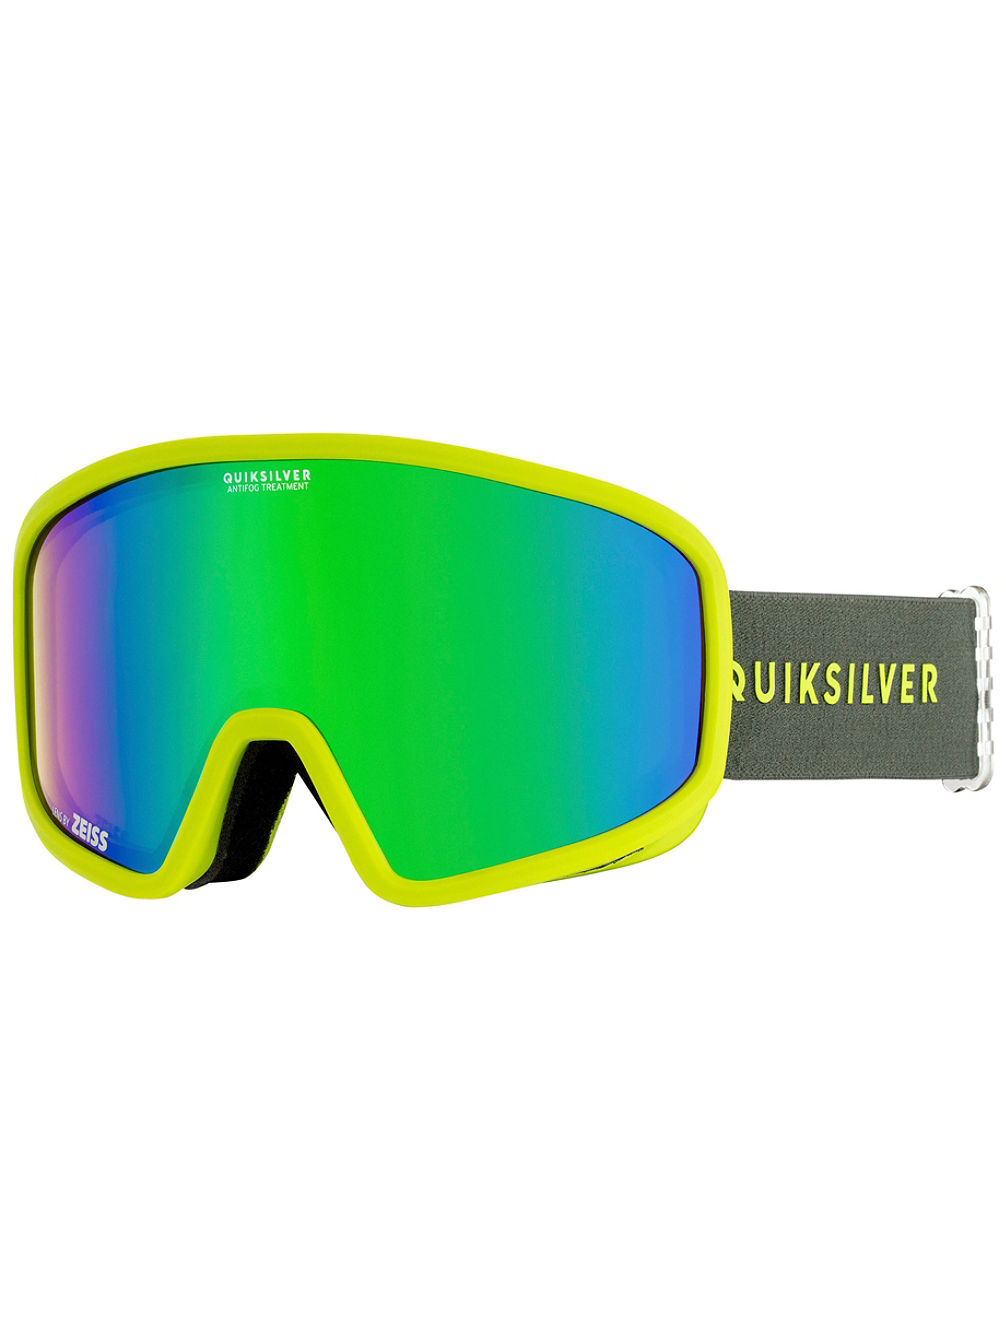 Browdy Lime Green Goggle